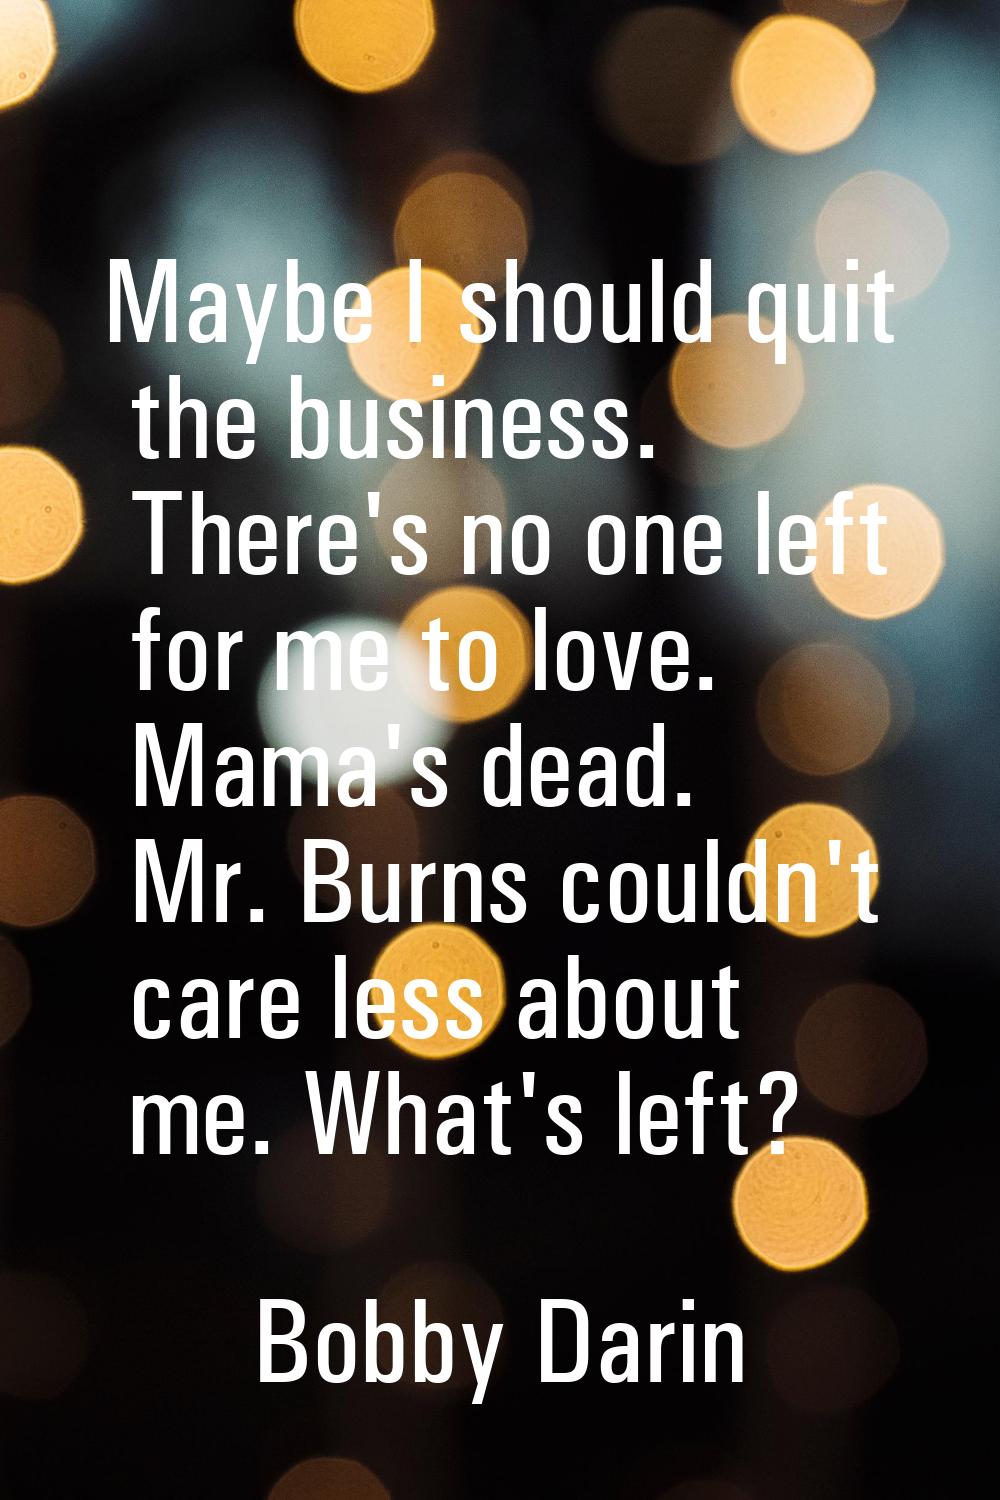 Maybe I should quit the business. There's no one left for me to love. Mama's dead. Mr. Burns couldn